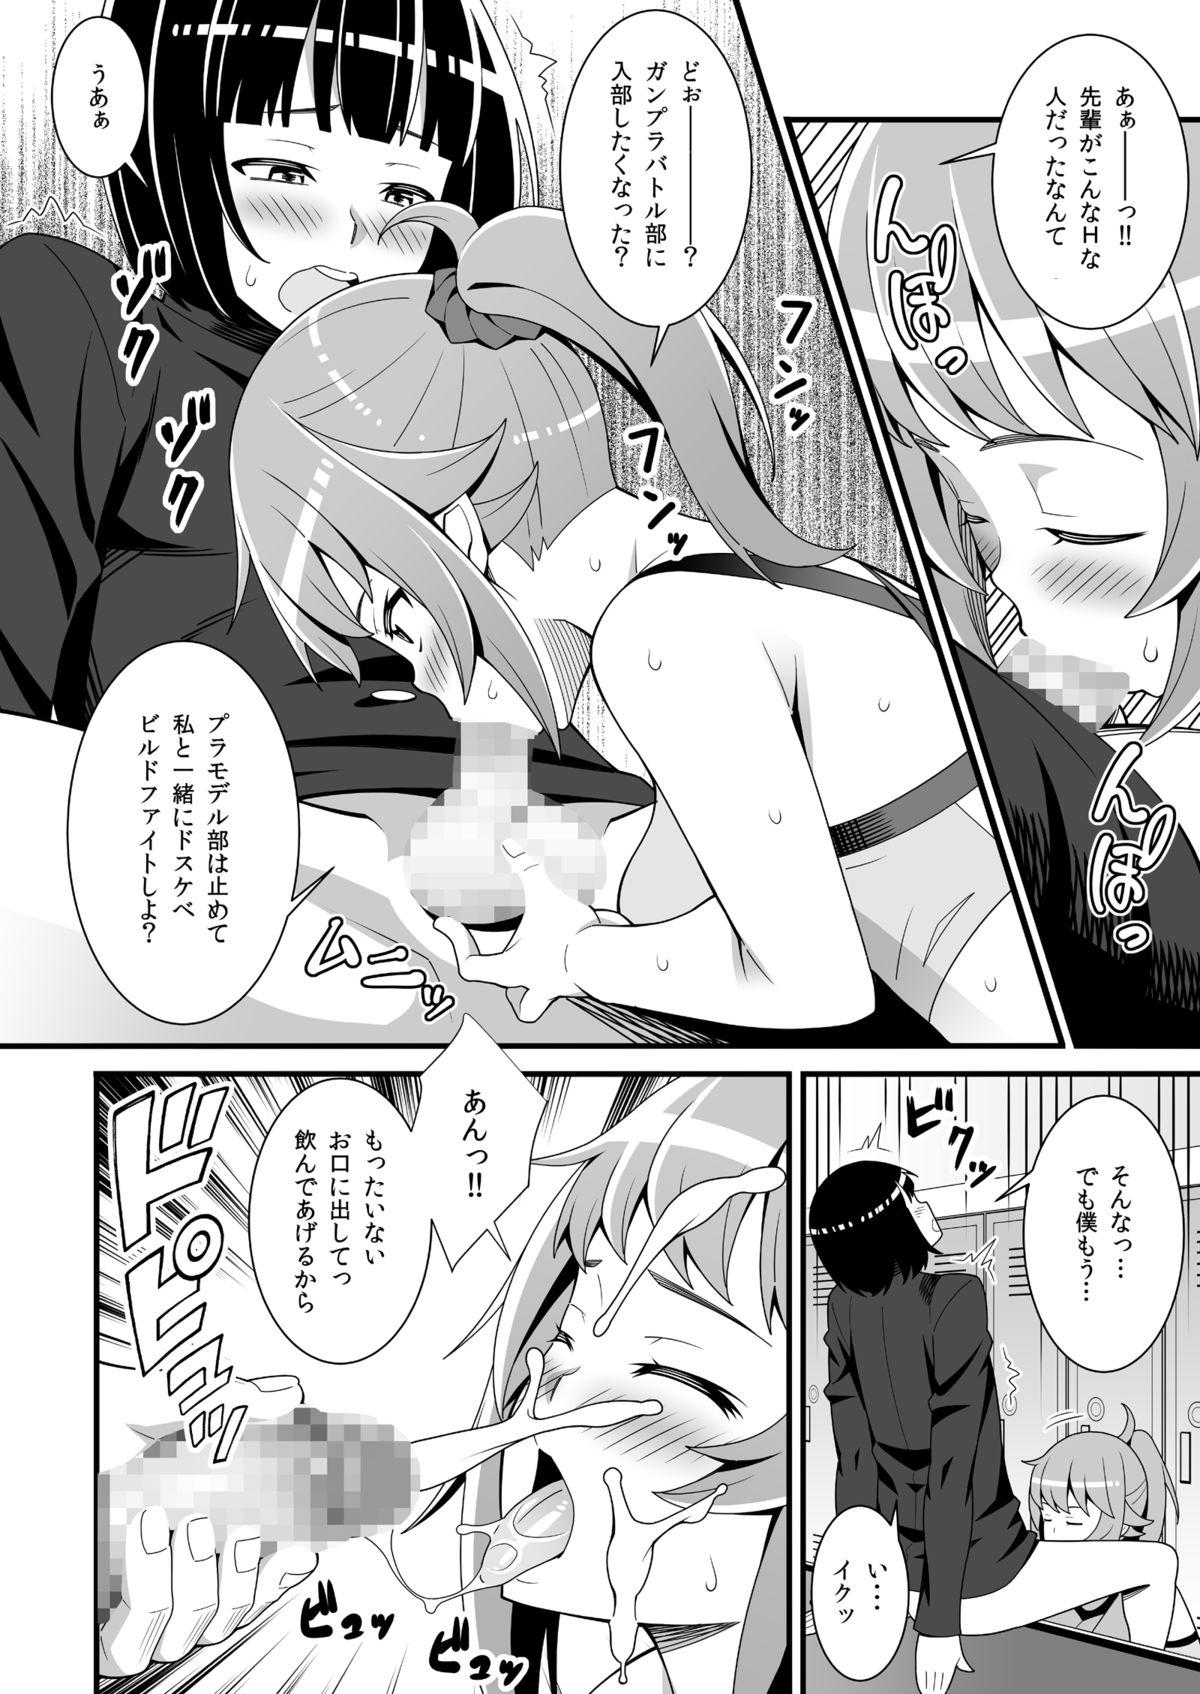 Polla Buchou no Dosukebe Buin Kanyuu Try - Gundam build fighters try Facial Cumshot - Page 11